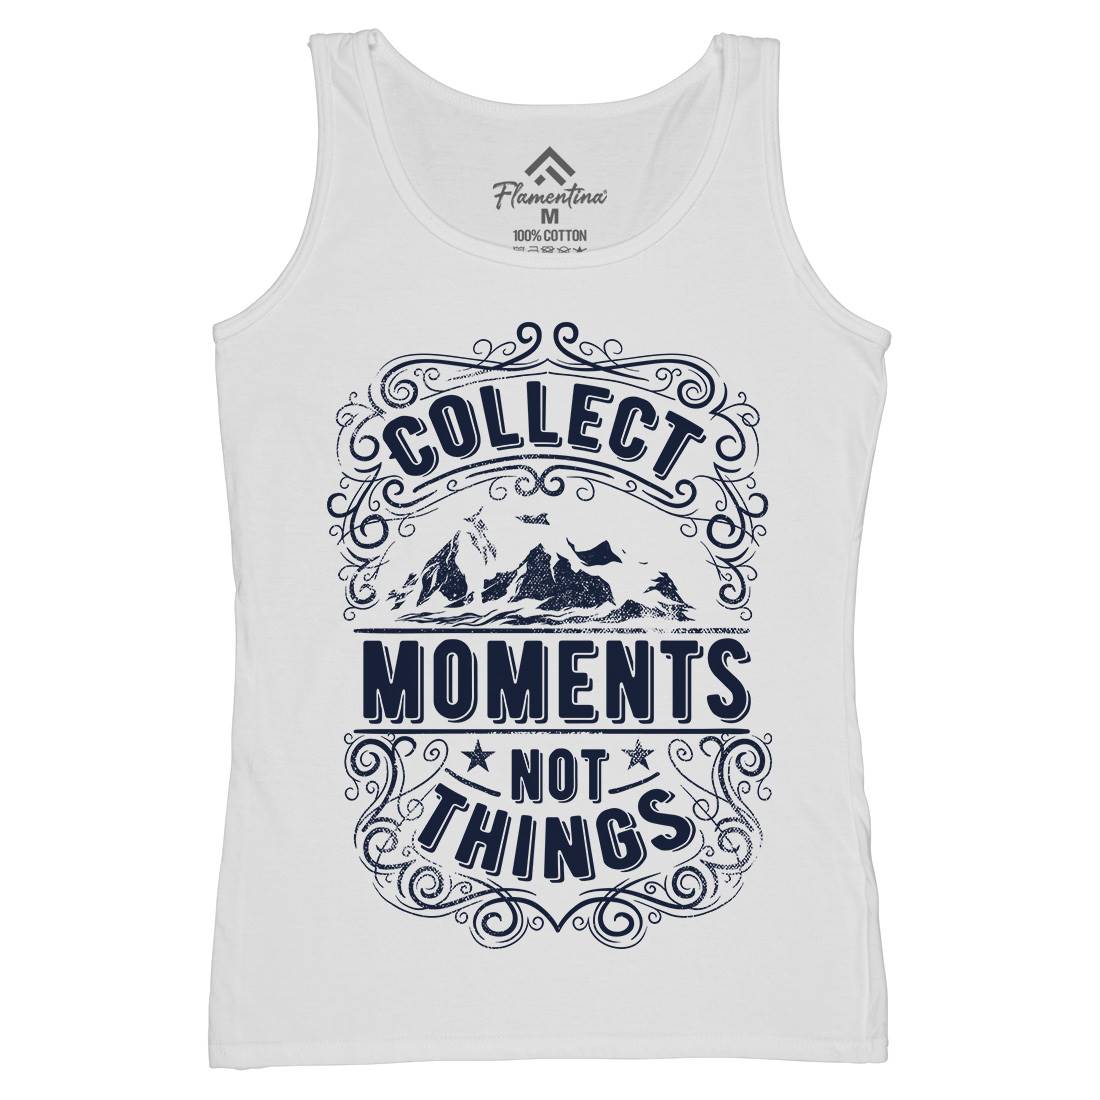 Collect Moments Not Things Womens Organic Tank Top Vest Quotes C918